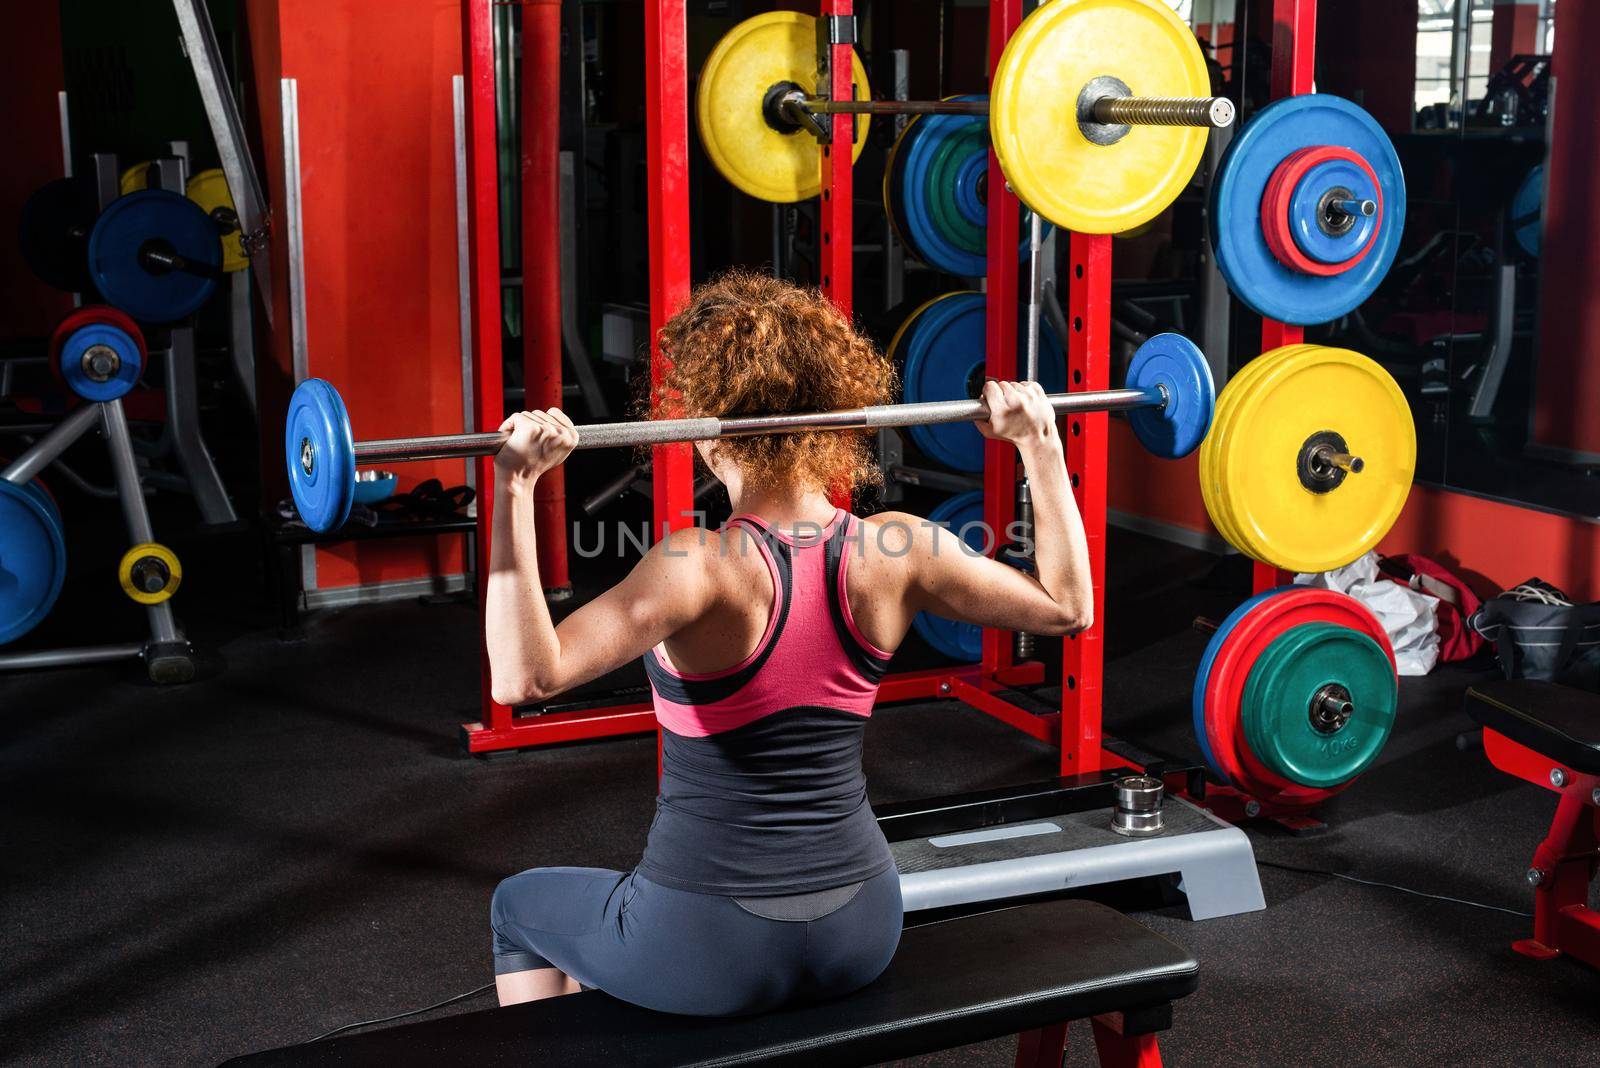 Woman bodybuilder engaged with a barbell in the gym. Healthy lifestyle.